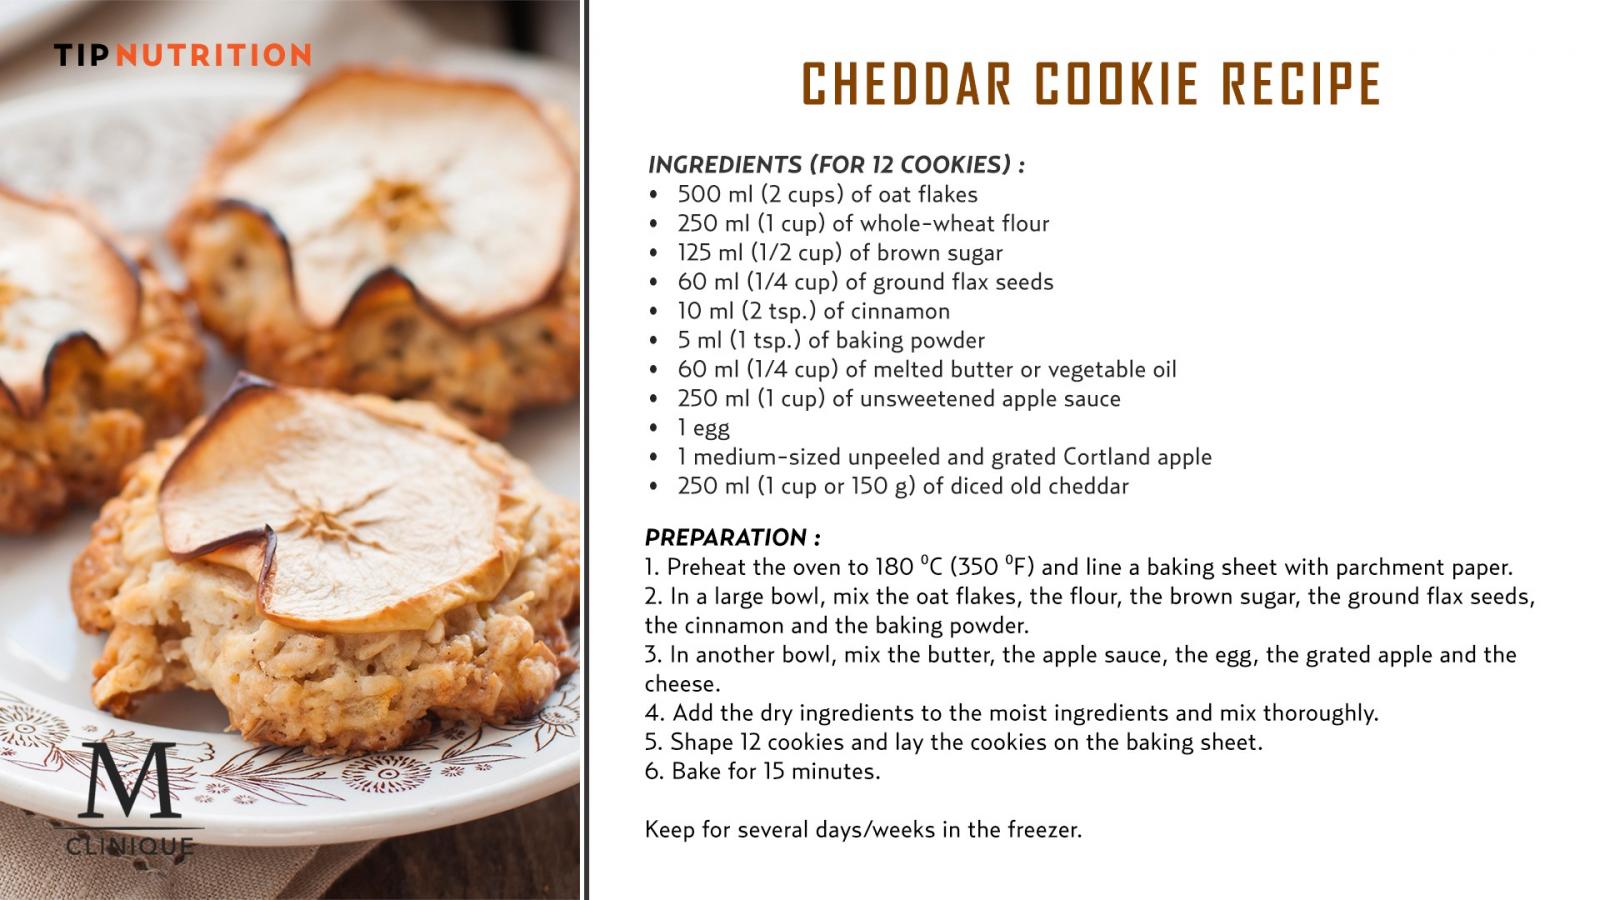 nutrition-cookies-cheddar